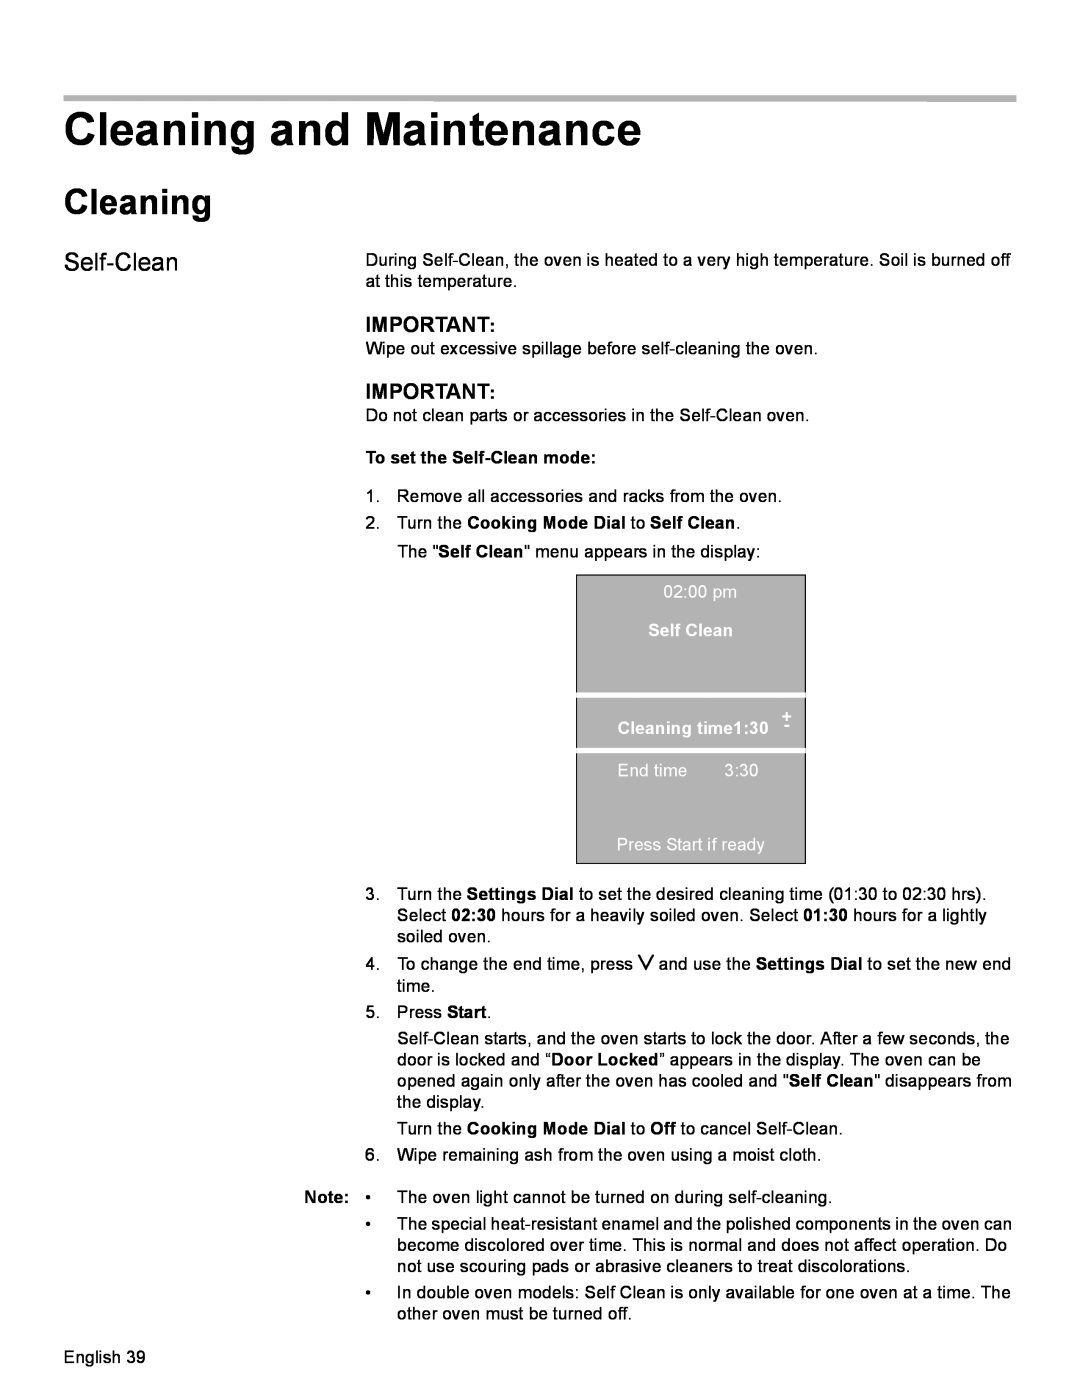 Bosch Appliances HBN56, HBL57, HBL56, HBN54 manual Cleaning and Maintenance, To set the Self-Cleanmode 